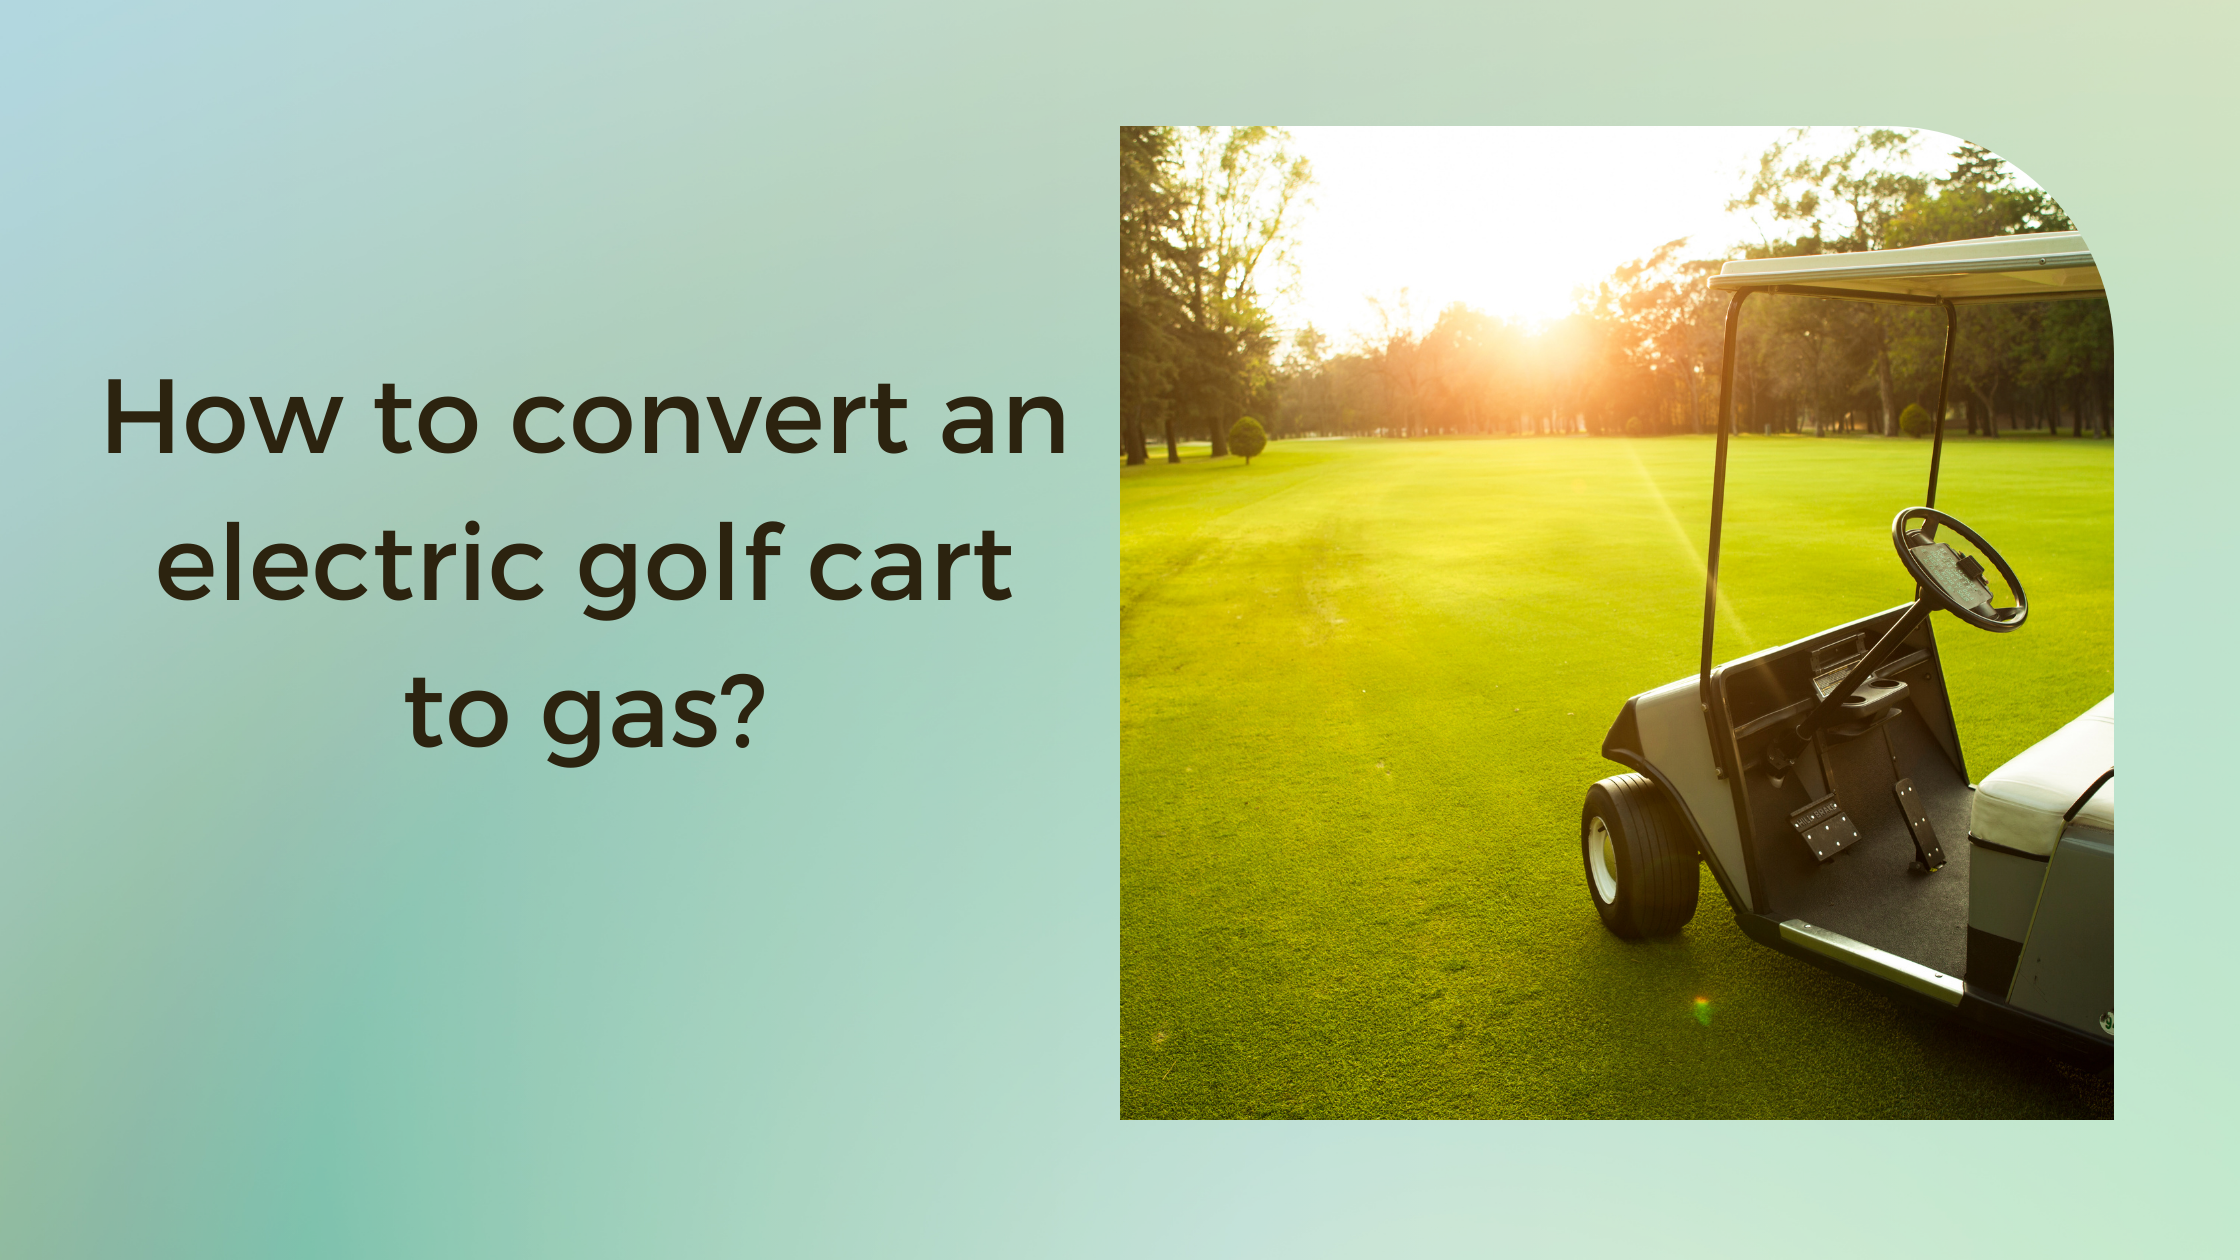 How to convert an electric golf cart to gas?  Learn step-by-step